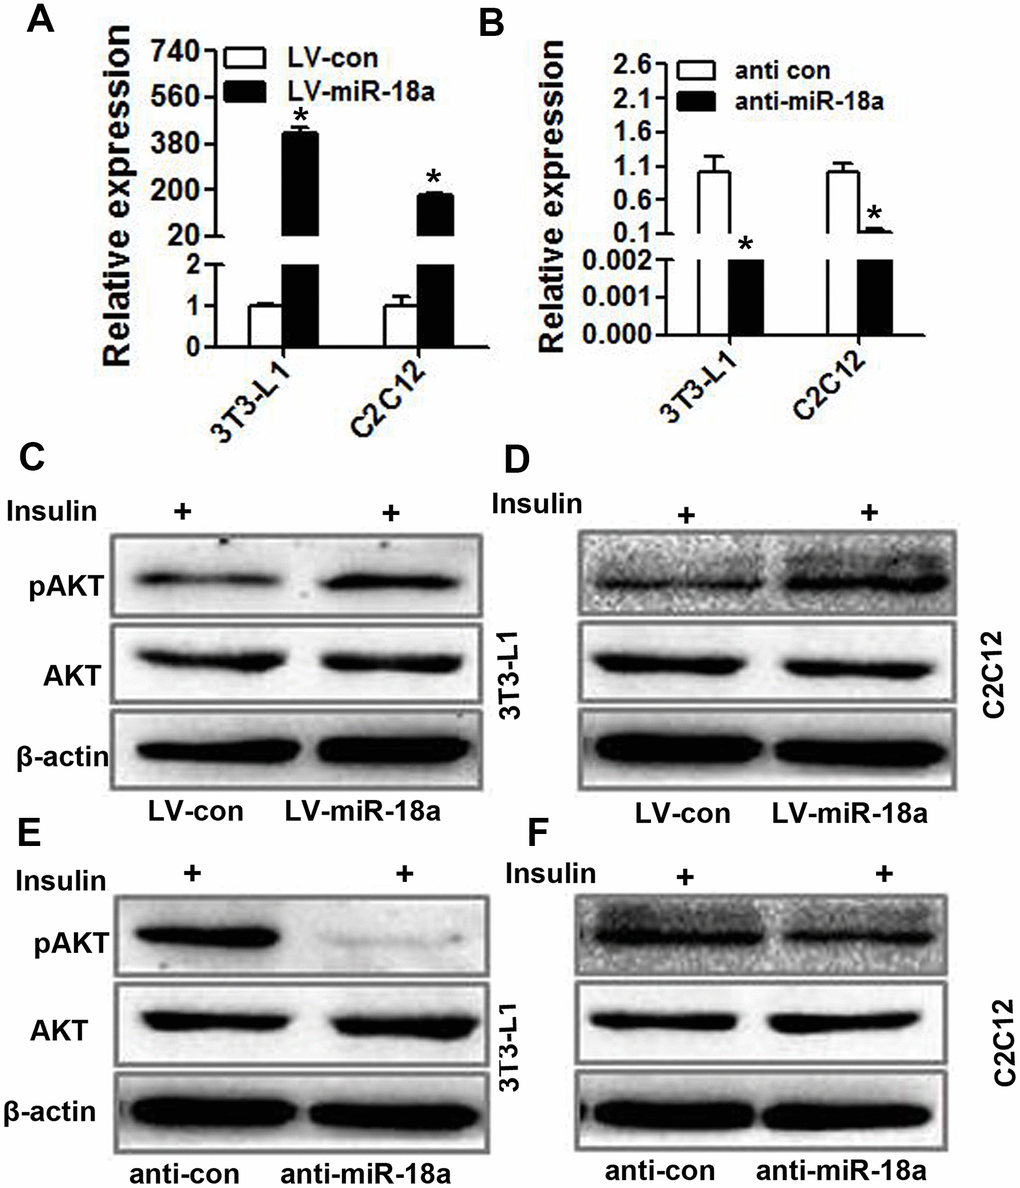 miR-18a enhances insulin-stimulated AKT phosphorylation/activation in insulin target cells. (A, B) MiR-18a levels were detected using qRT-PCR in 3T3-L1 and C2C12 cells in which miR-18a was overexpressed (LV-miR-18a) (A) or inhibited (anti-miR-18a) (B). (C, D) Western blot analysis of insulin-stimulated AKT phosphorylation in 3T3-L1 (C) and C2C12 (D) cells overexpressing miR-18a. (E, F) Western blot analysis of insulin-stimulated AKT phosphorylation in 3T3-L1 (E) and C2C12 (F) cells transfected with miR-18a inhibitors (mean ± SD, *P